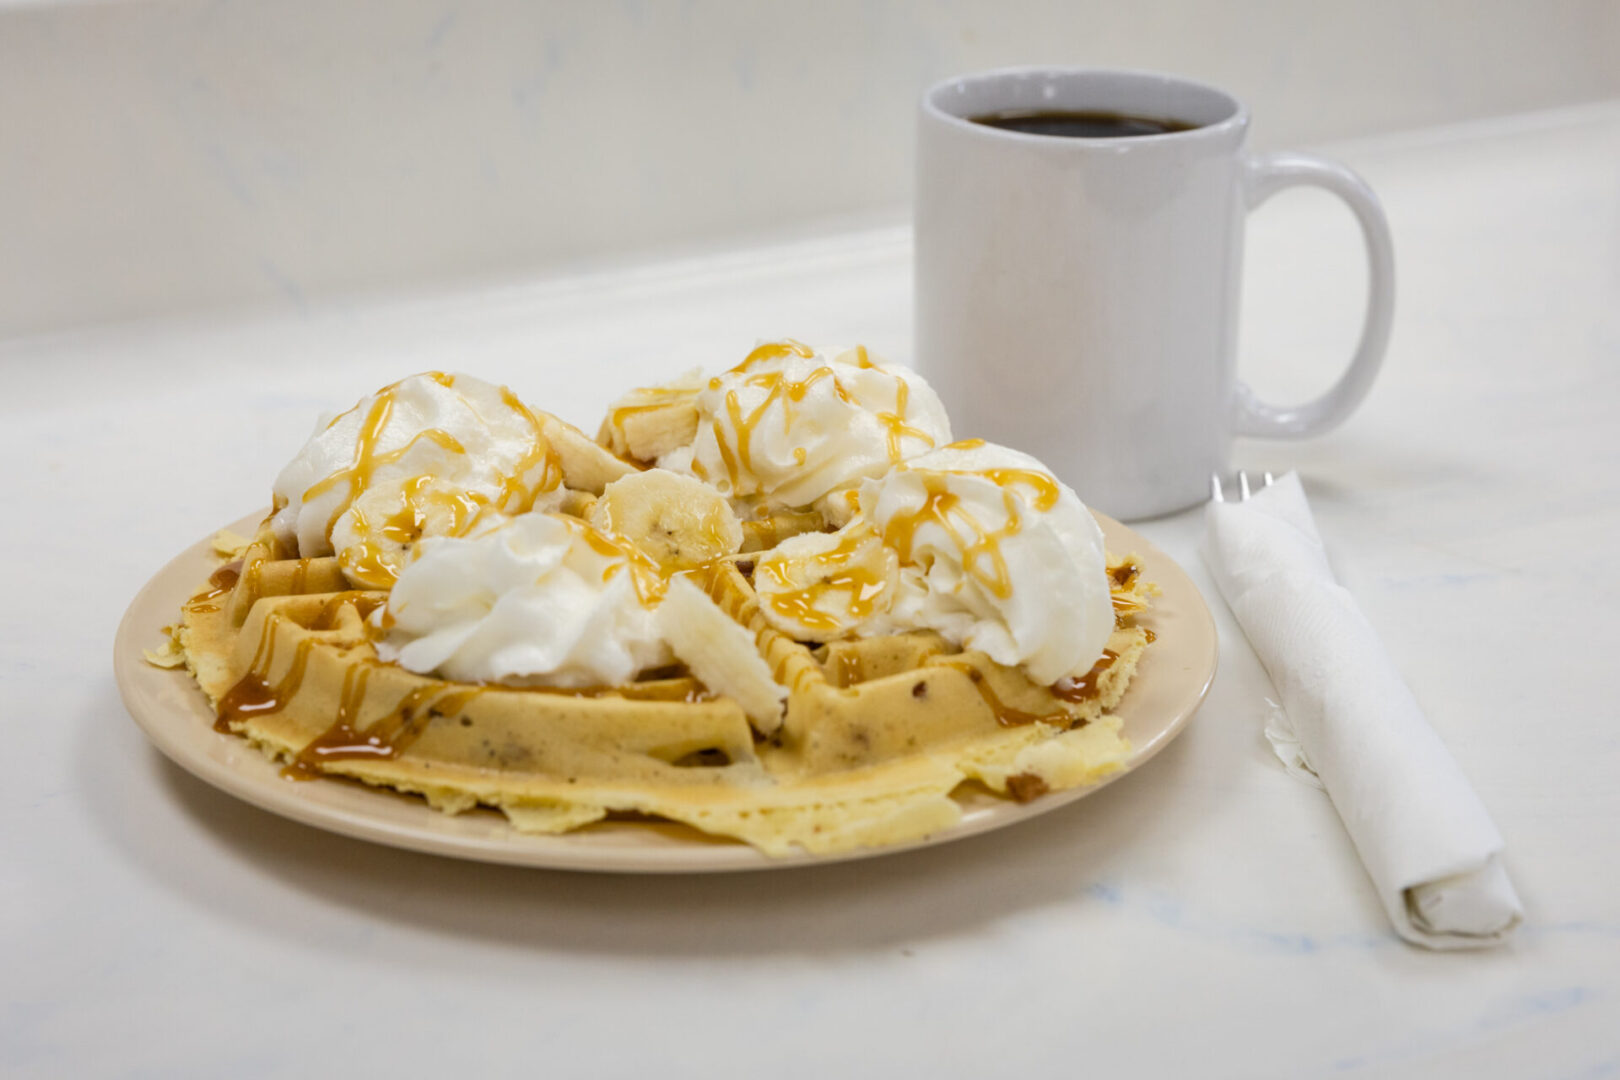 A plate of waffles with whipped cream and caramel.